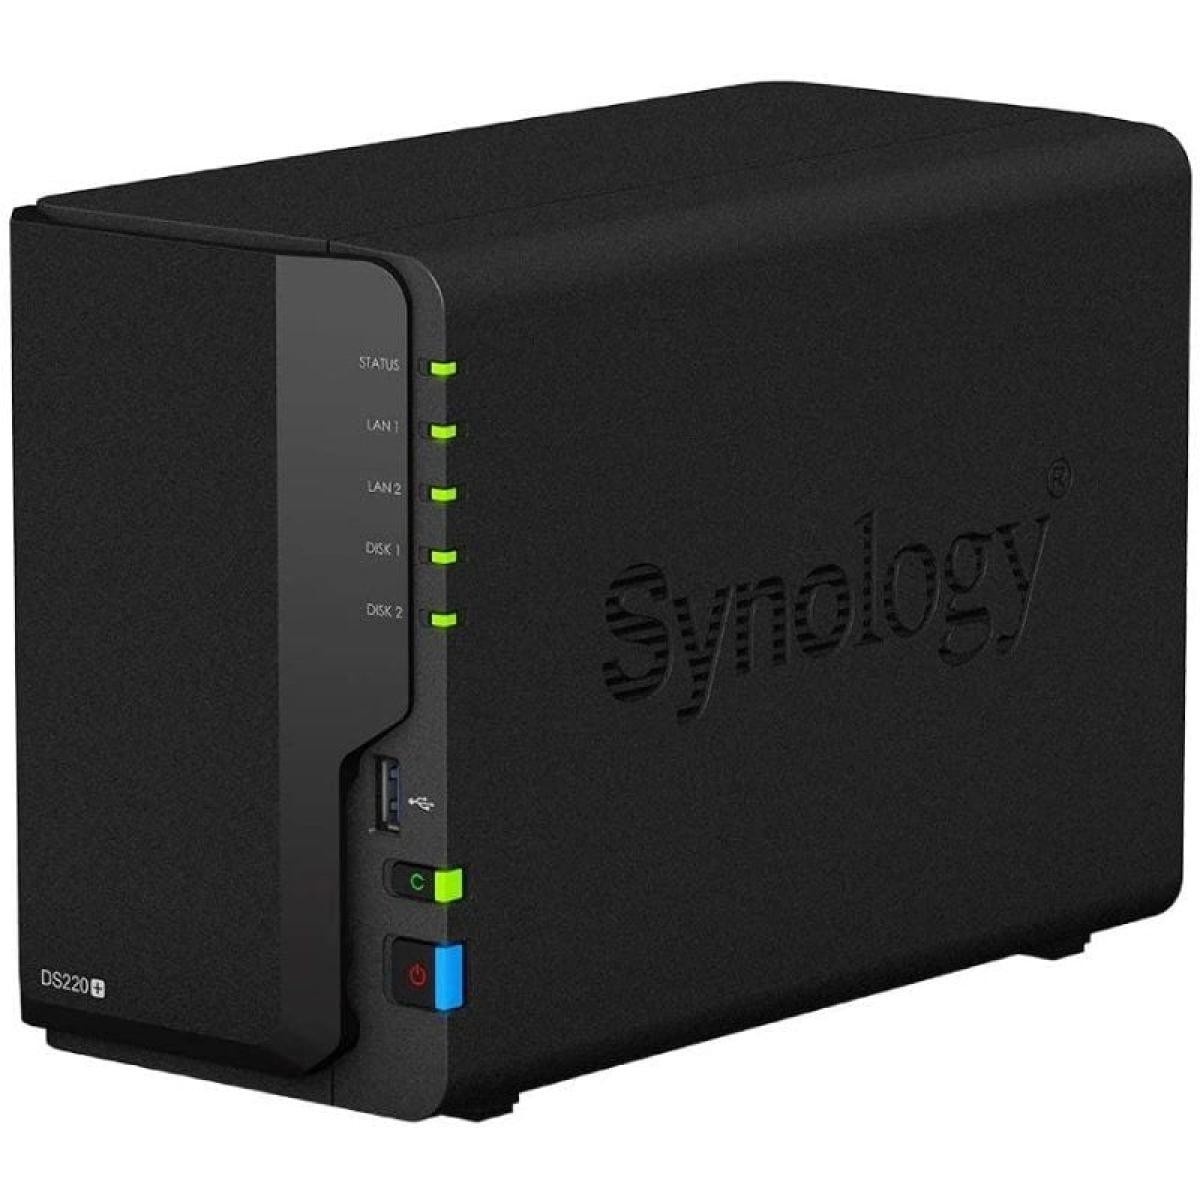 NAS SYNOLOGY DISKSTATION DS220+/ 2 BAHIAS 3.5"- 2.5"/ 2GB DDR4/ FORMATO TORRE